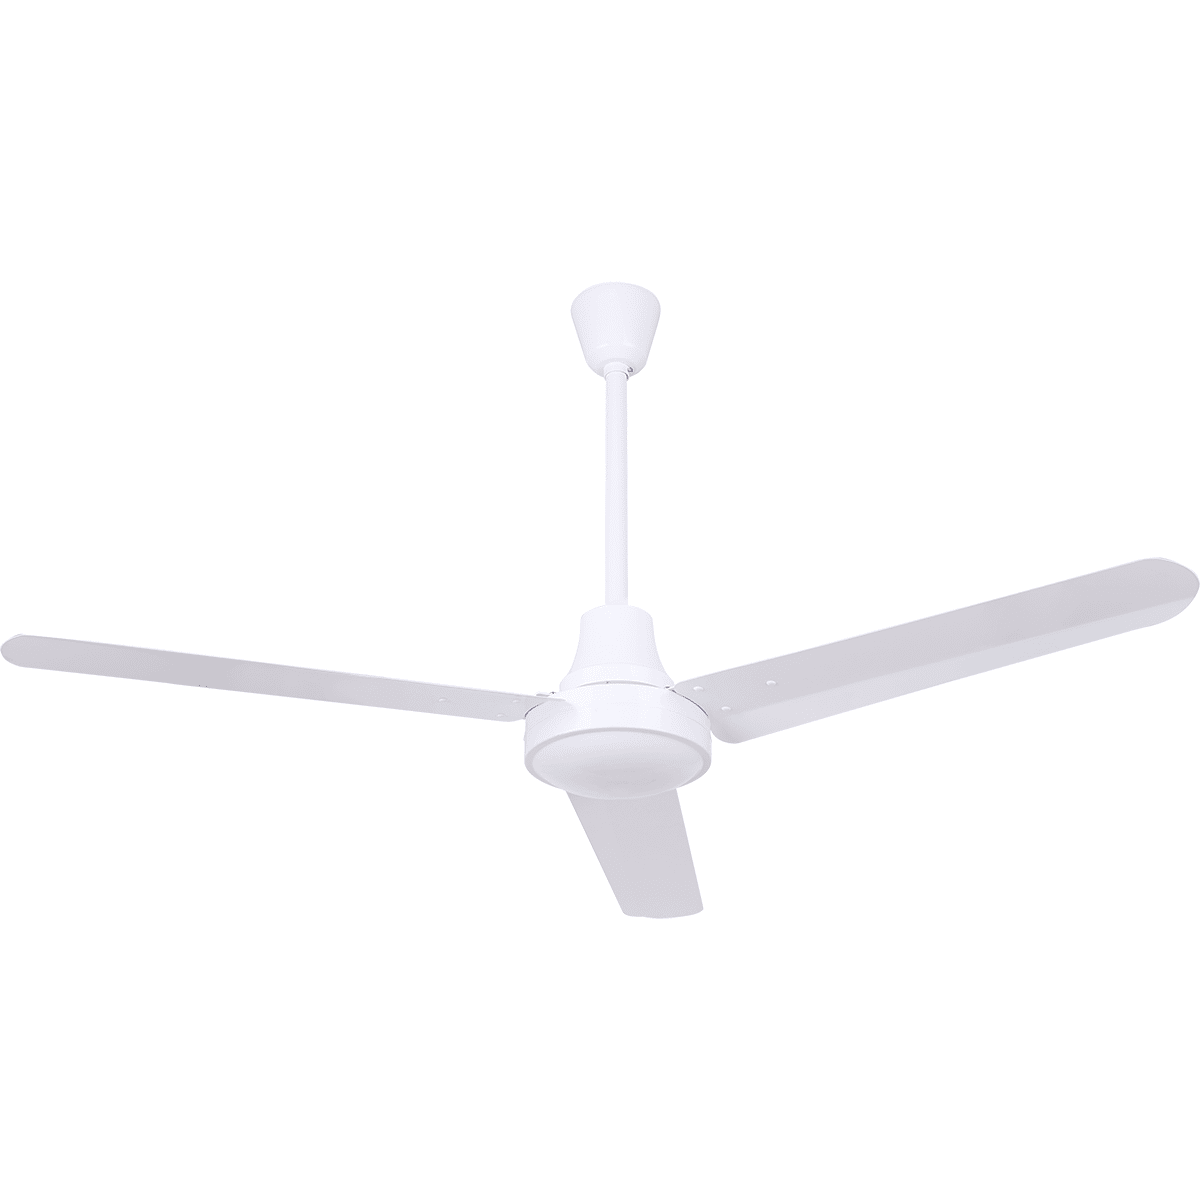 Canarm High Performance DC Industrial Fan - 60-in. White